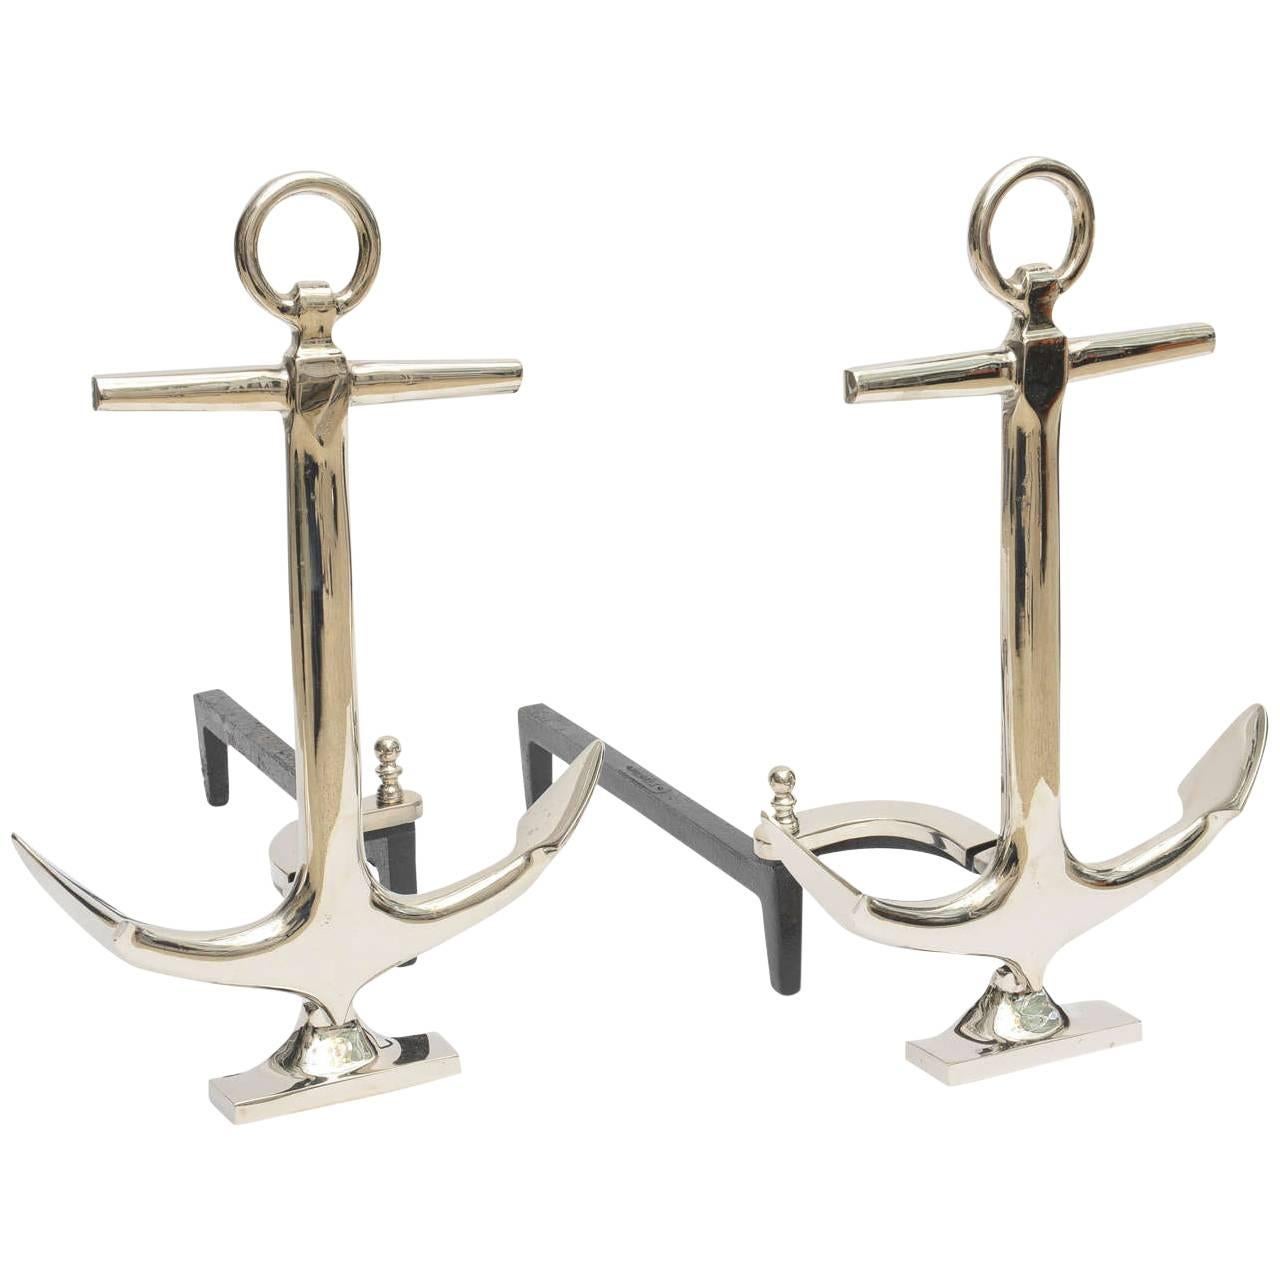 Pair of Nickel-Plated Anchor-Form Andirons by Puritan